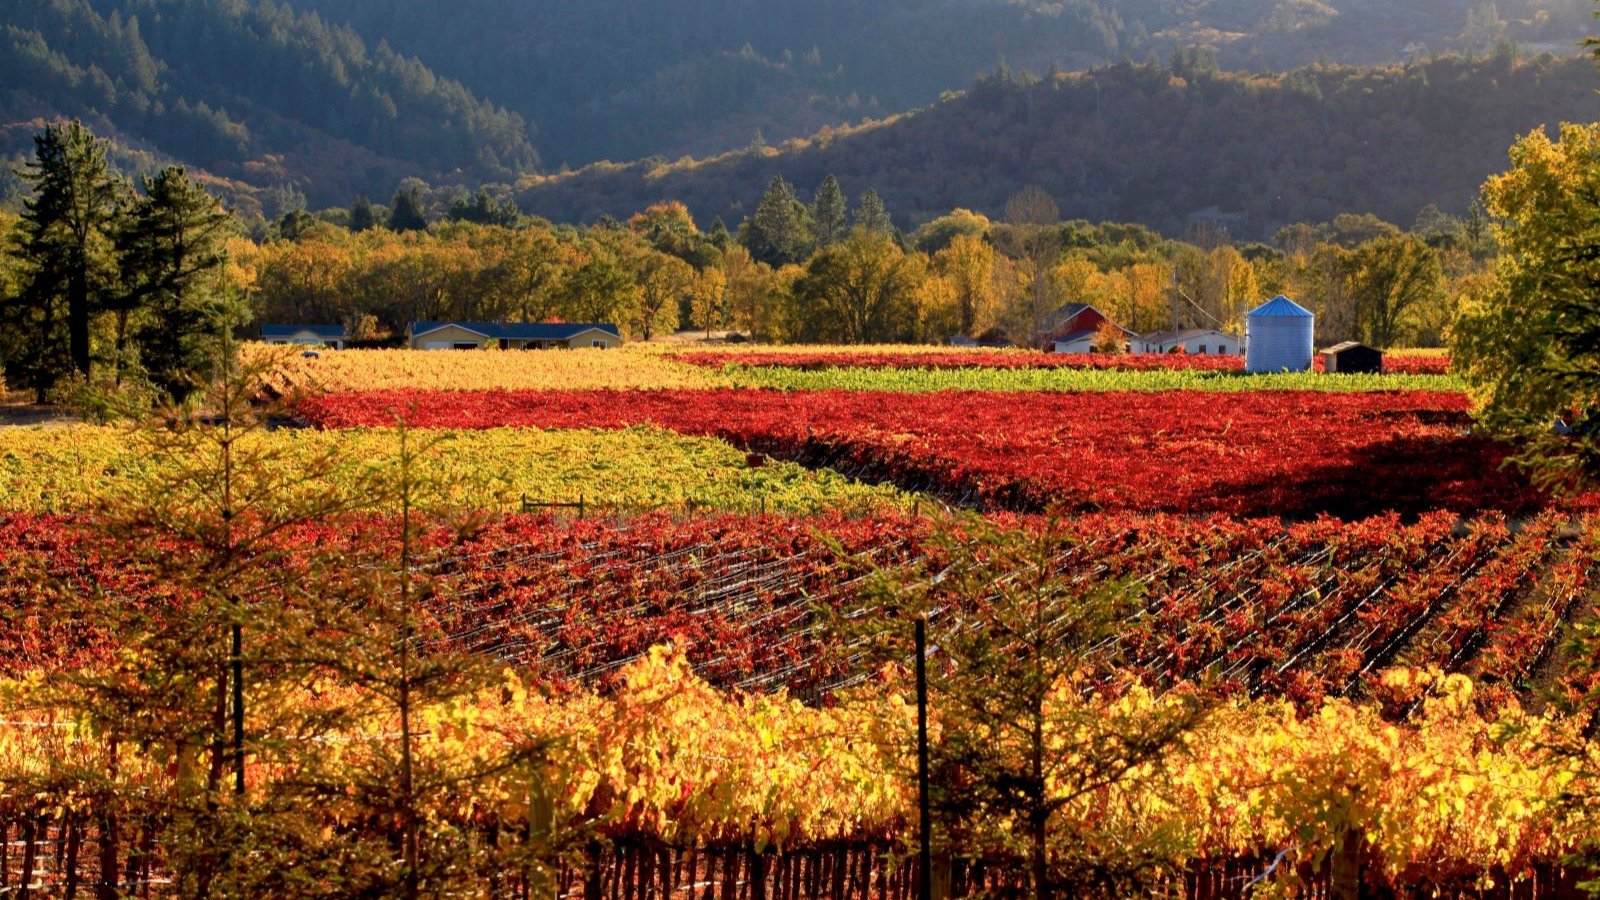 <p>Couples who love wine and sunshine will be in heaven in Napa Valley. This area is everything people say it is, with wineries, local stores, and an overall cheerful, appealing vibe.</p><p>The scenery in wine country is breathtaking, but there’s more to it than vineyards. Couples can go on romantic hot-air balloon rides or stay at boutique inns or a resort. There’s a hot nightlife scene, so it’s ideal for couples who want an elevated, energetic vacation that also allows for relaxation.</p>